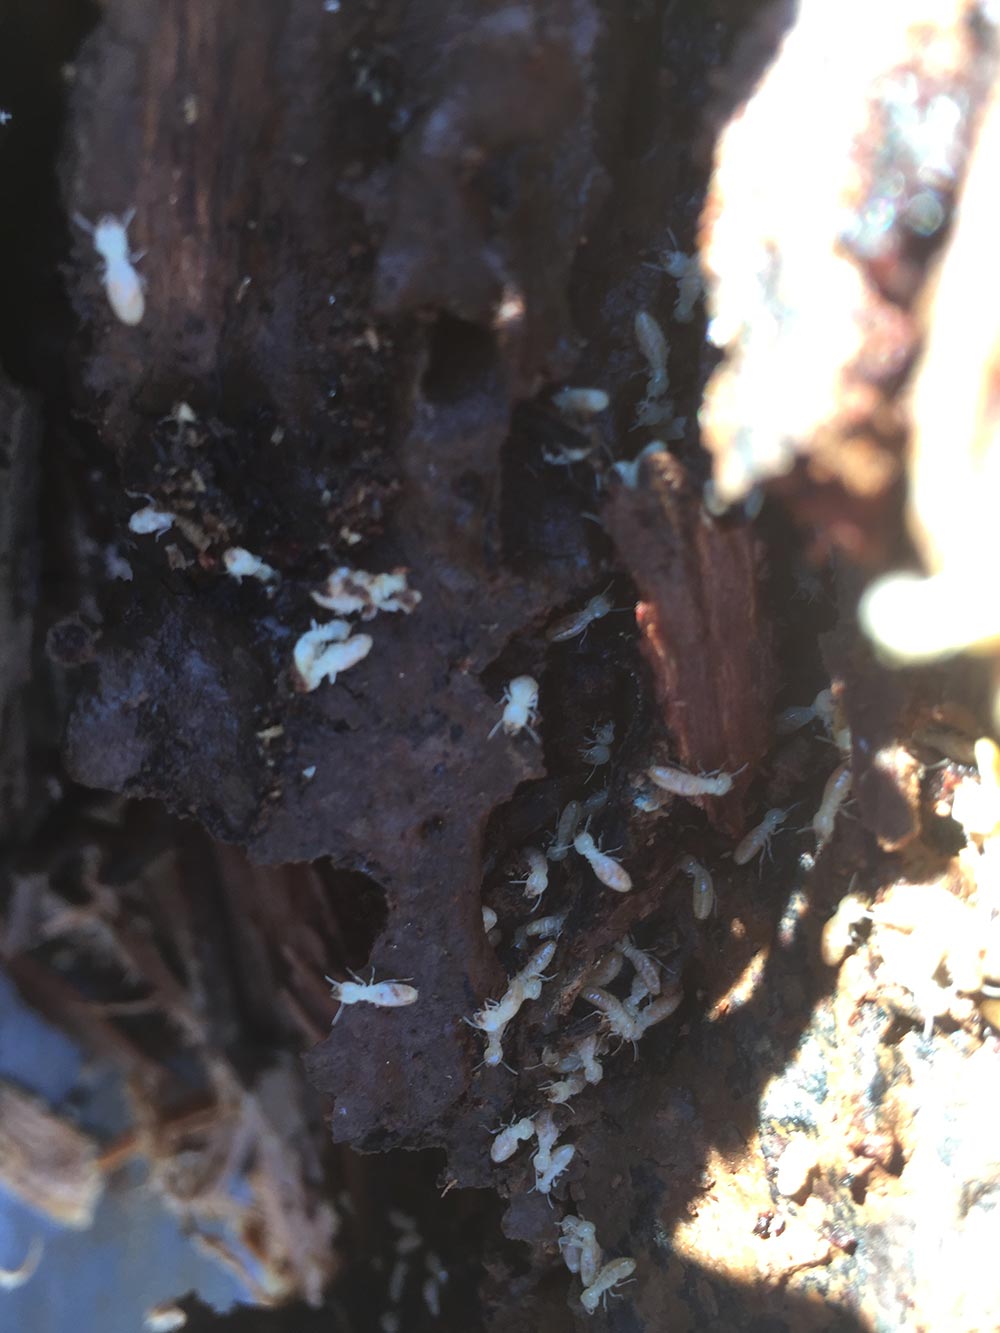 Termites in timber – Combined Building and Timber Pest Inspection will include Bloom Inspections searching for present or past termite damage.